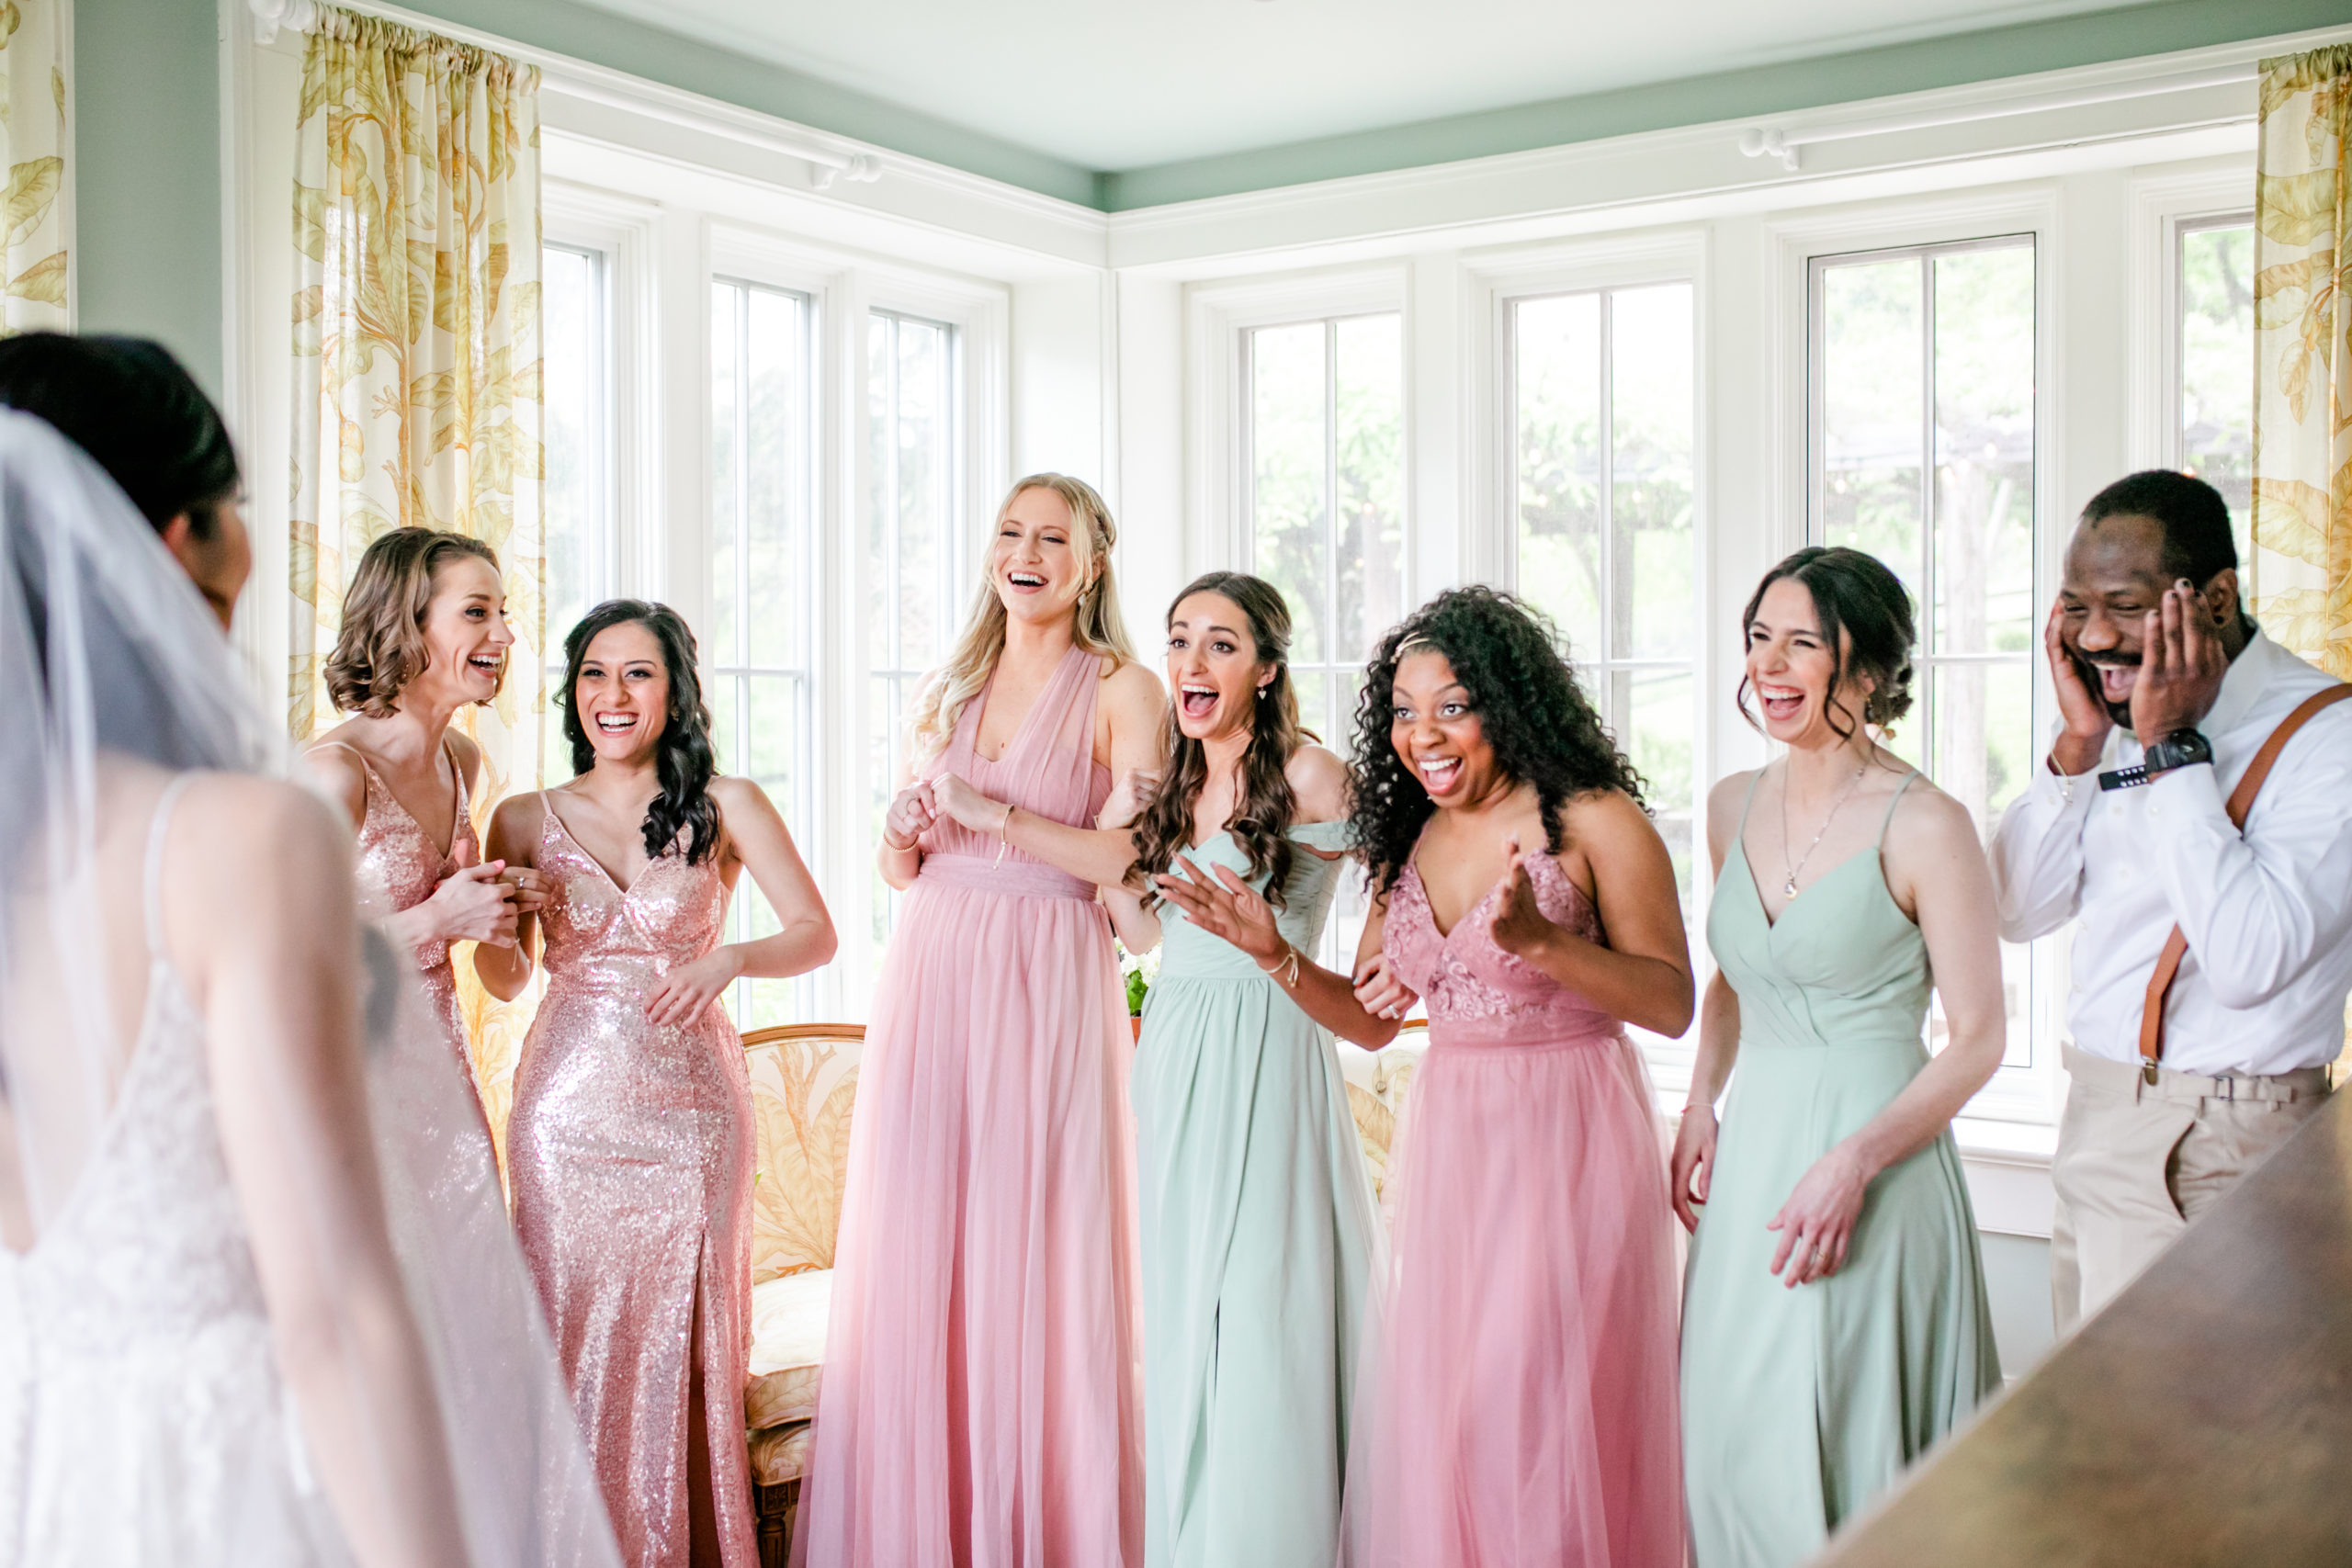 new wedding traditions, wedding photography planning, wedding planning, wedding planning tips, American wedding traditions, wedding ideas, bridesmaids first look, excited bridesmaids, sorbet colored bridesmaids dress